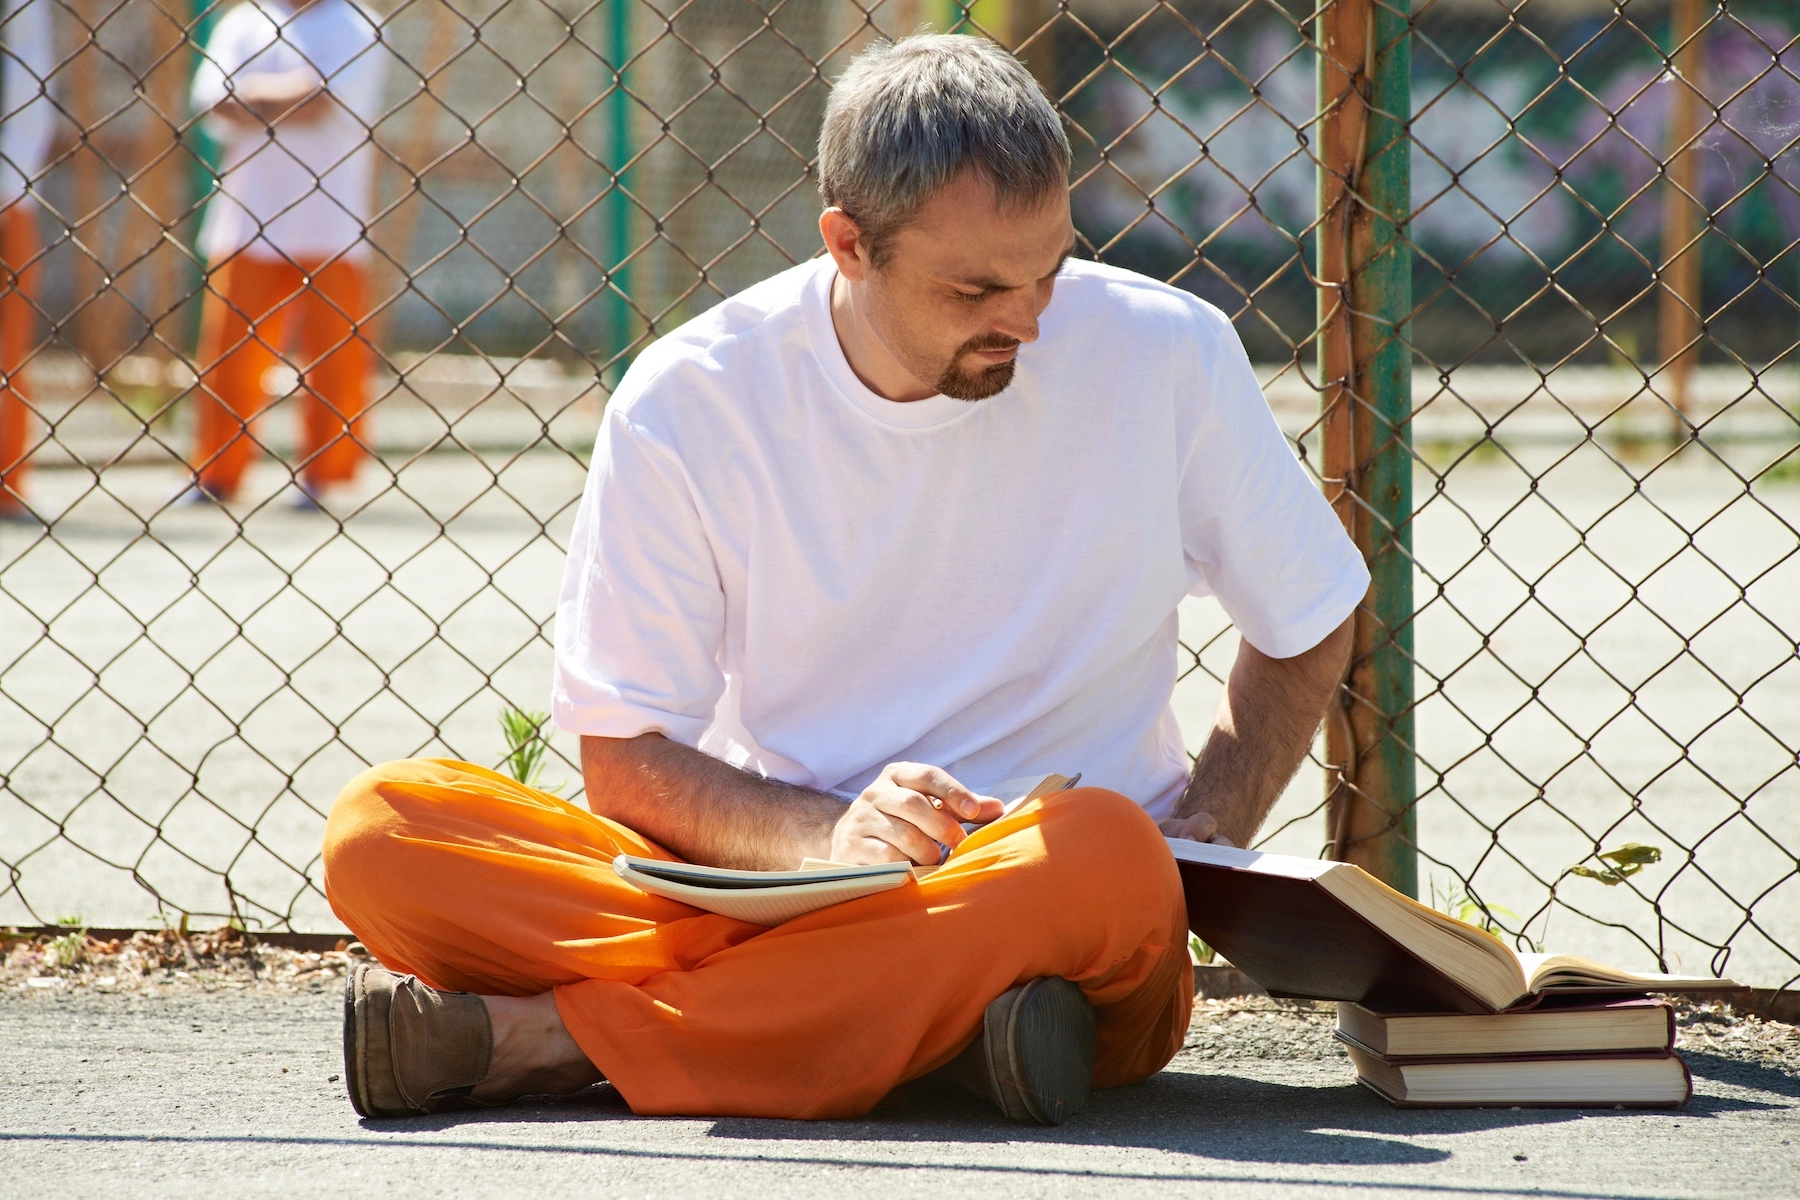 A man in prison attire studies with books and a notebook in a prison yard during the daytime